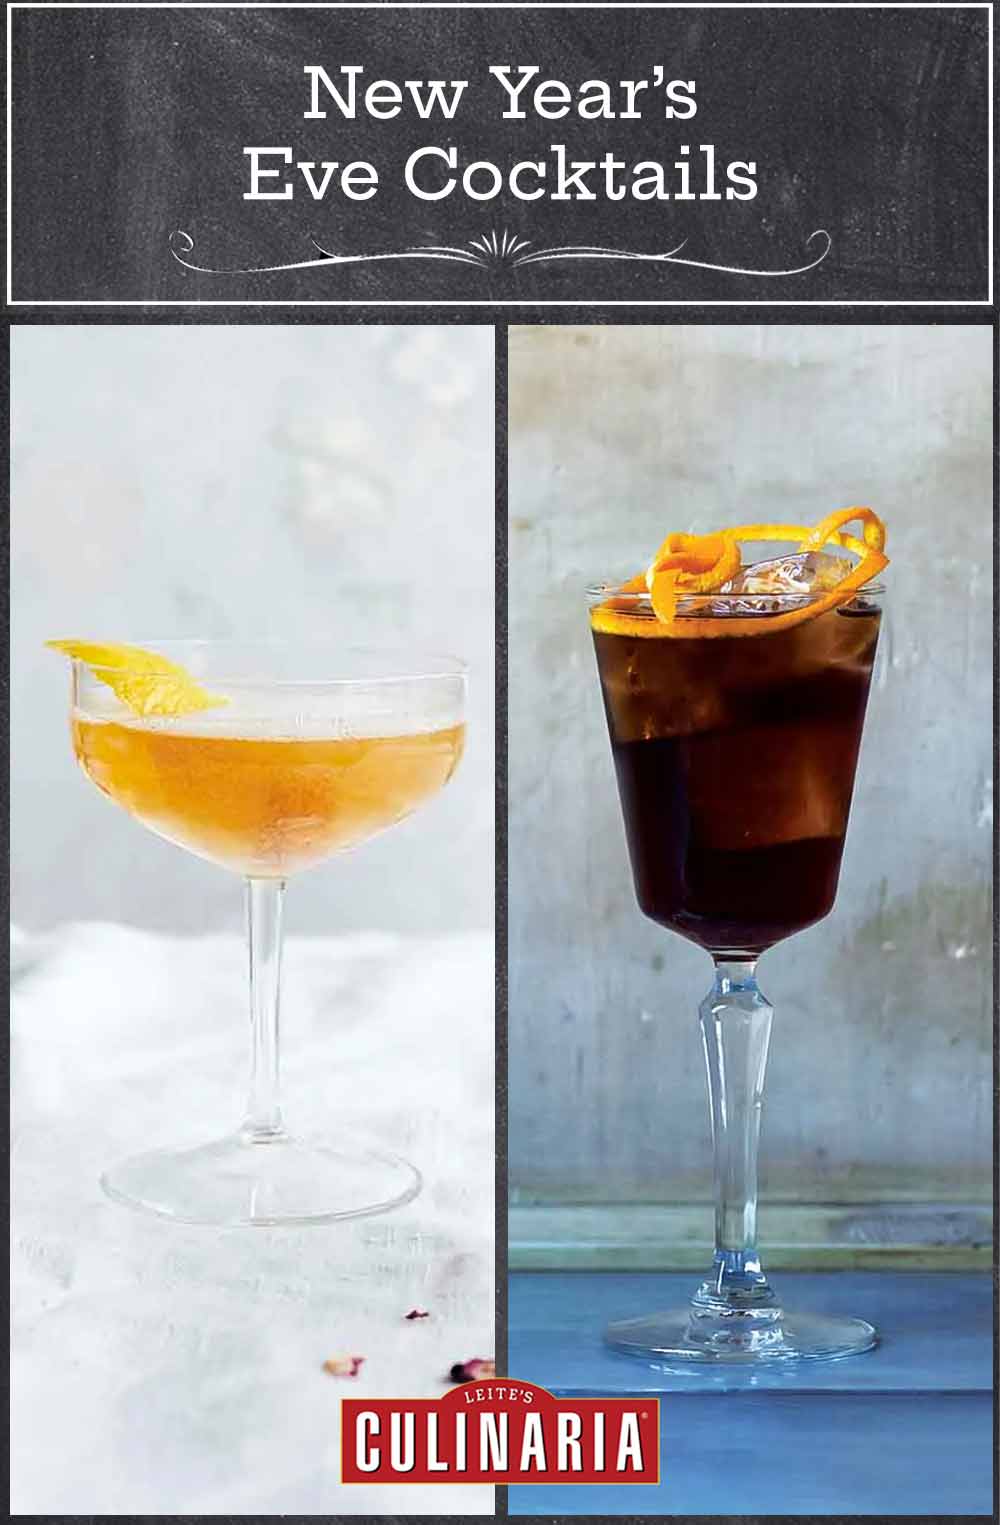 Images of two New Year's Eve cocktails -- champagne cocktail and adonis cocktail.